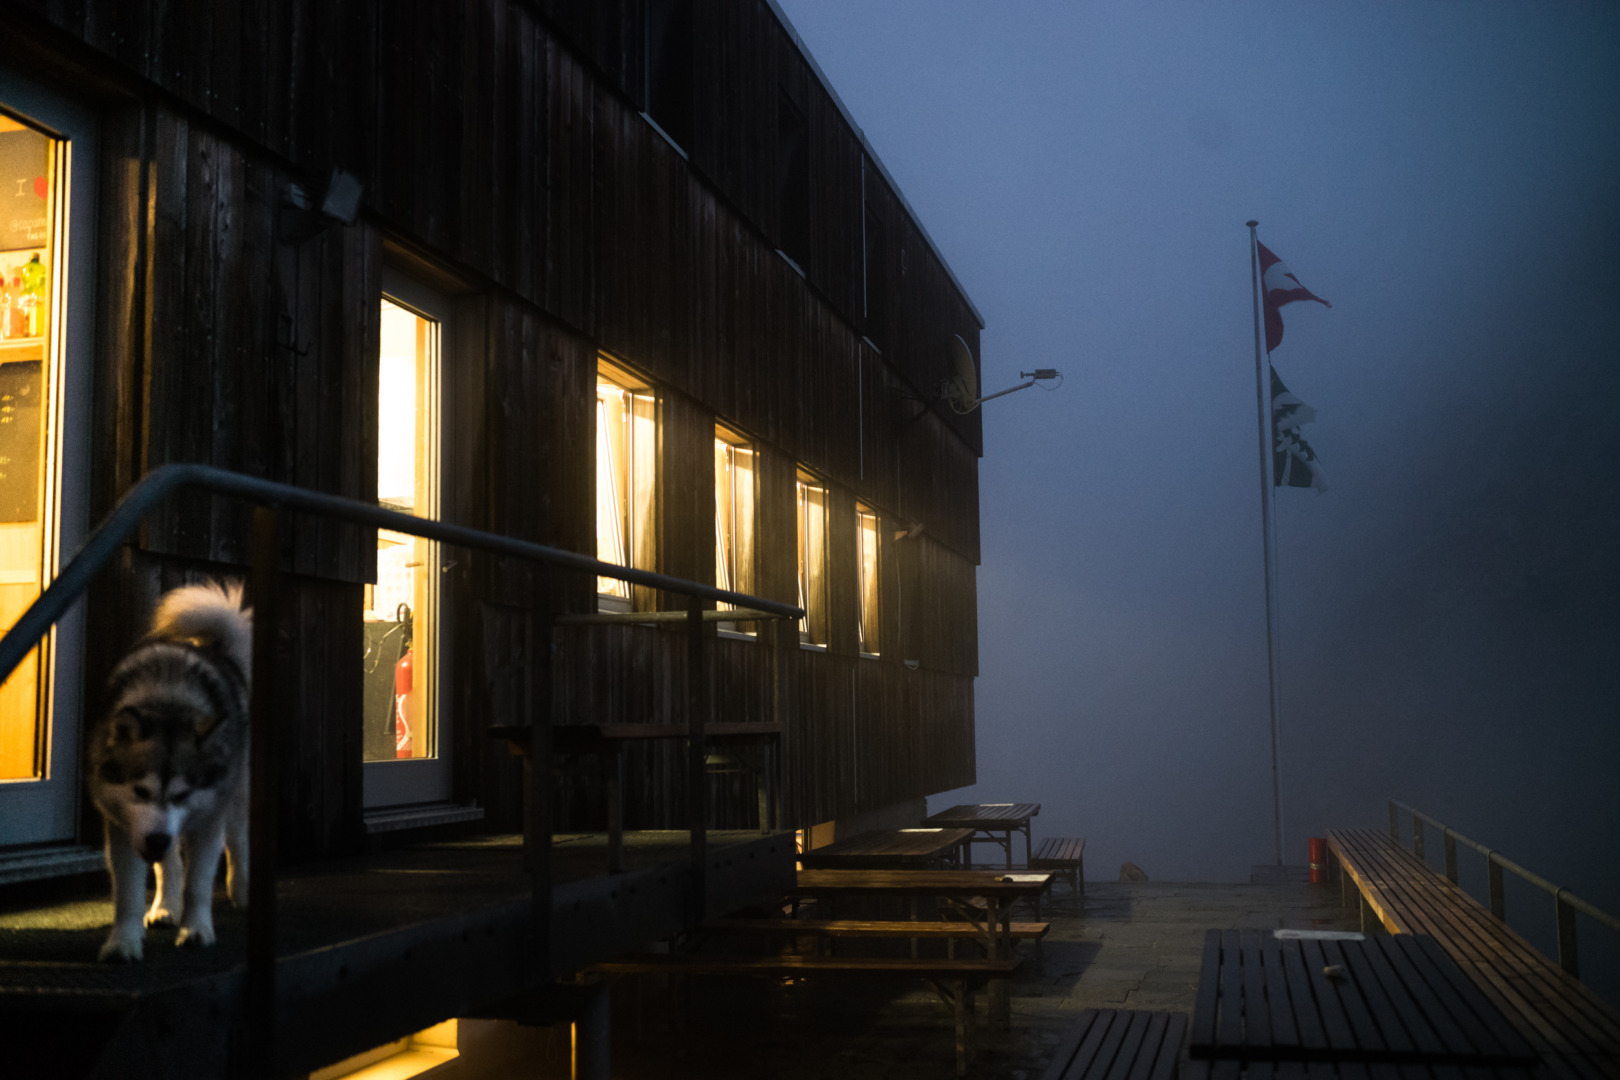 35mm creates an excellent angle of view for many purposes, included reportage work. A stormy night outside Capanna Cristallina in the Swiss Alps. Zeiss Distagon 35/1.4 on Leica M10. 1/600 sec, f/1.4., ISO 6400.